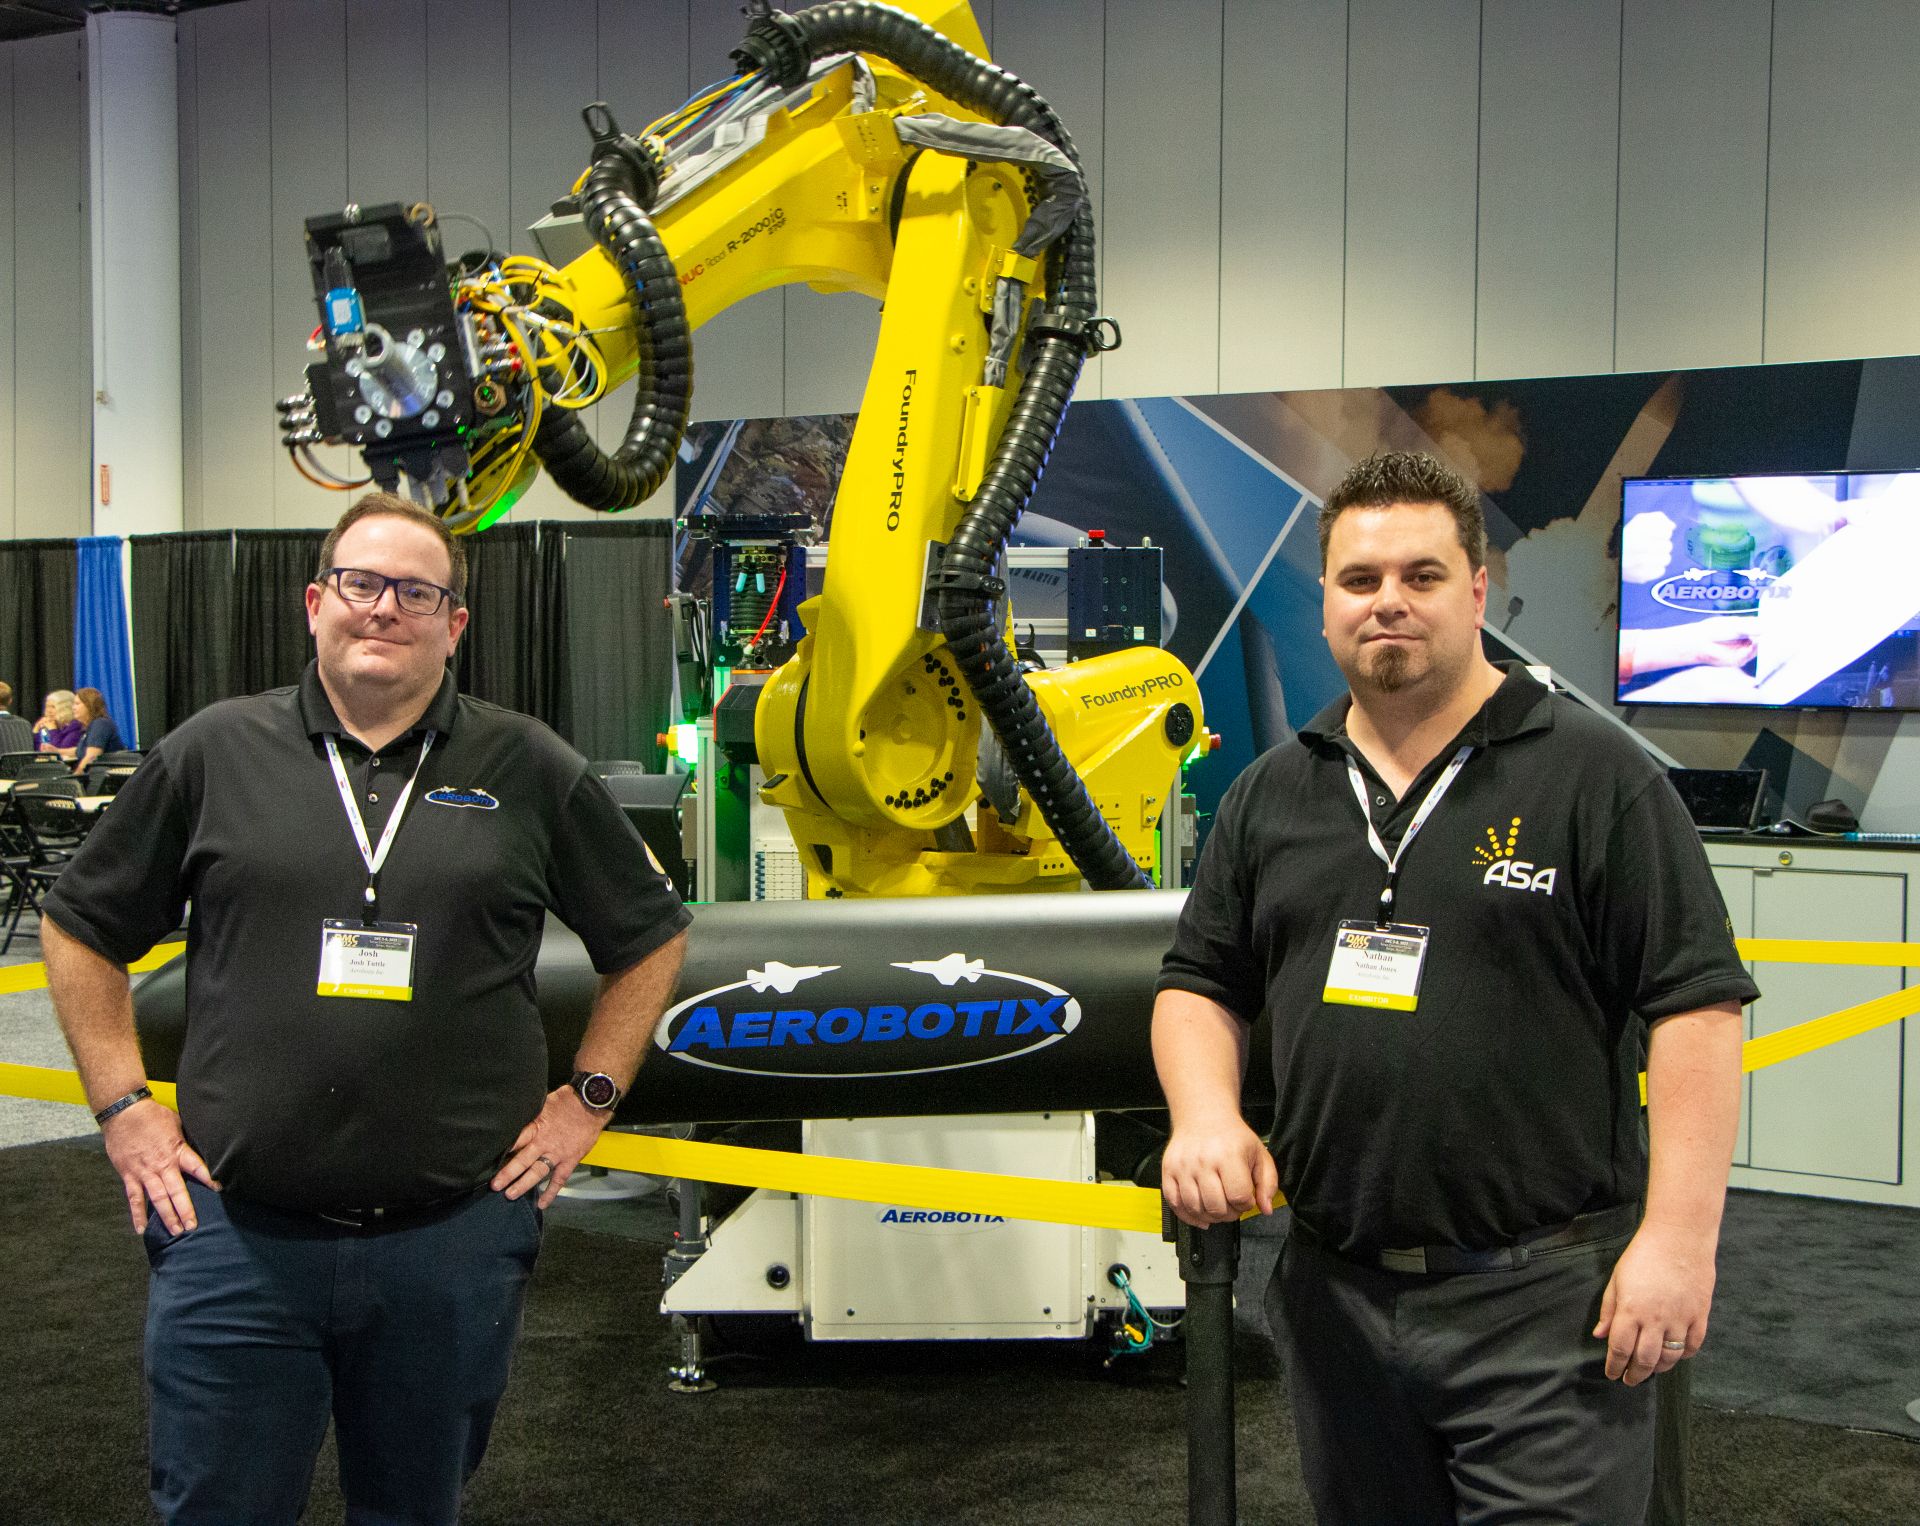 Aerobotix's Josh Tuttle, left, and ASA's Nathan Jones, right, pose for a picture at DMC 2022 in Tampa, Florida.